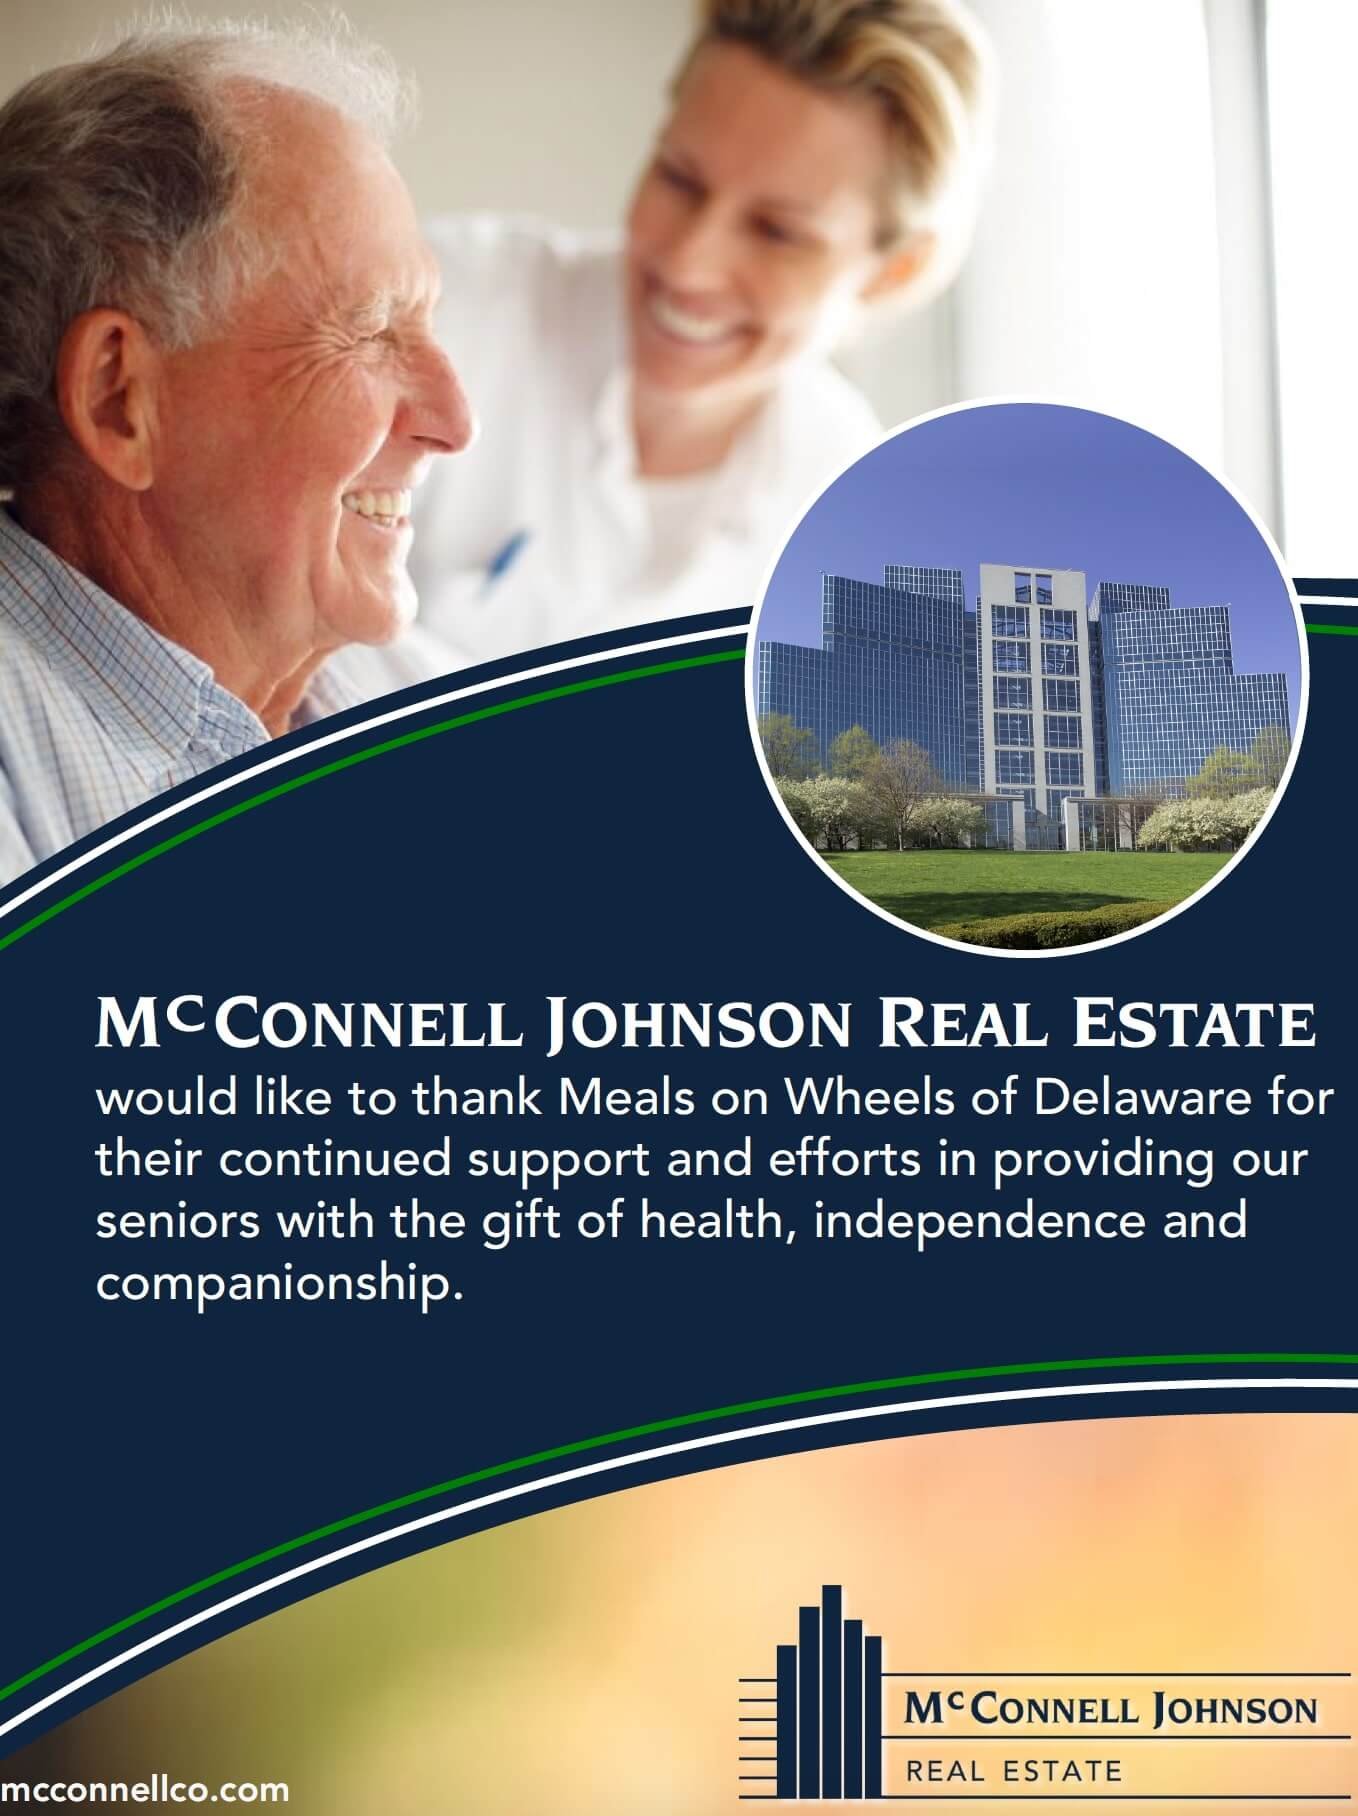 mcconnell johnson real estate meals on wheels ad